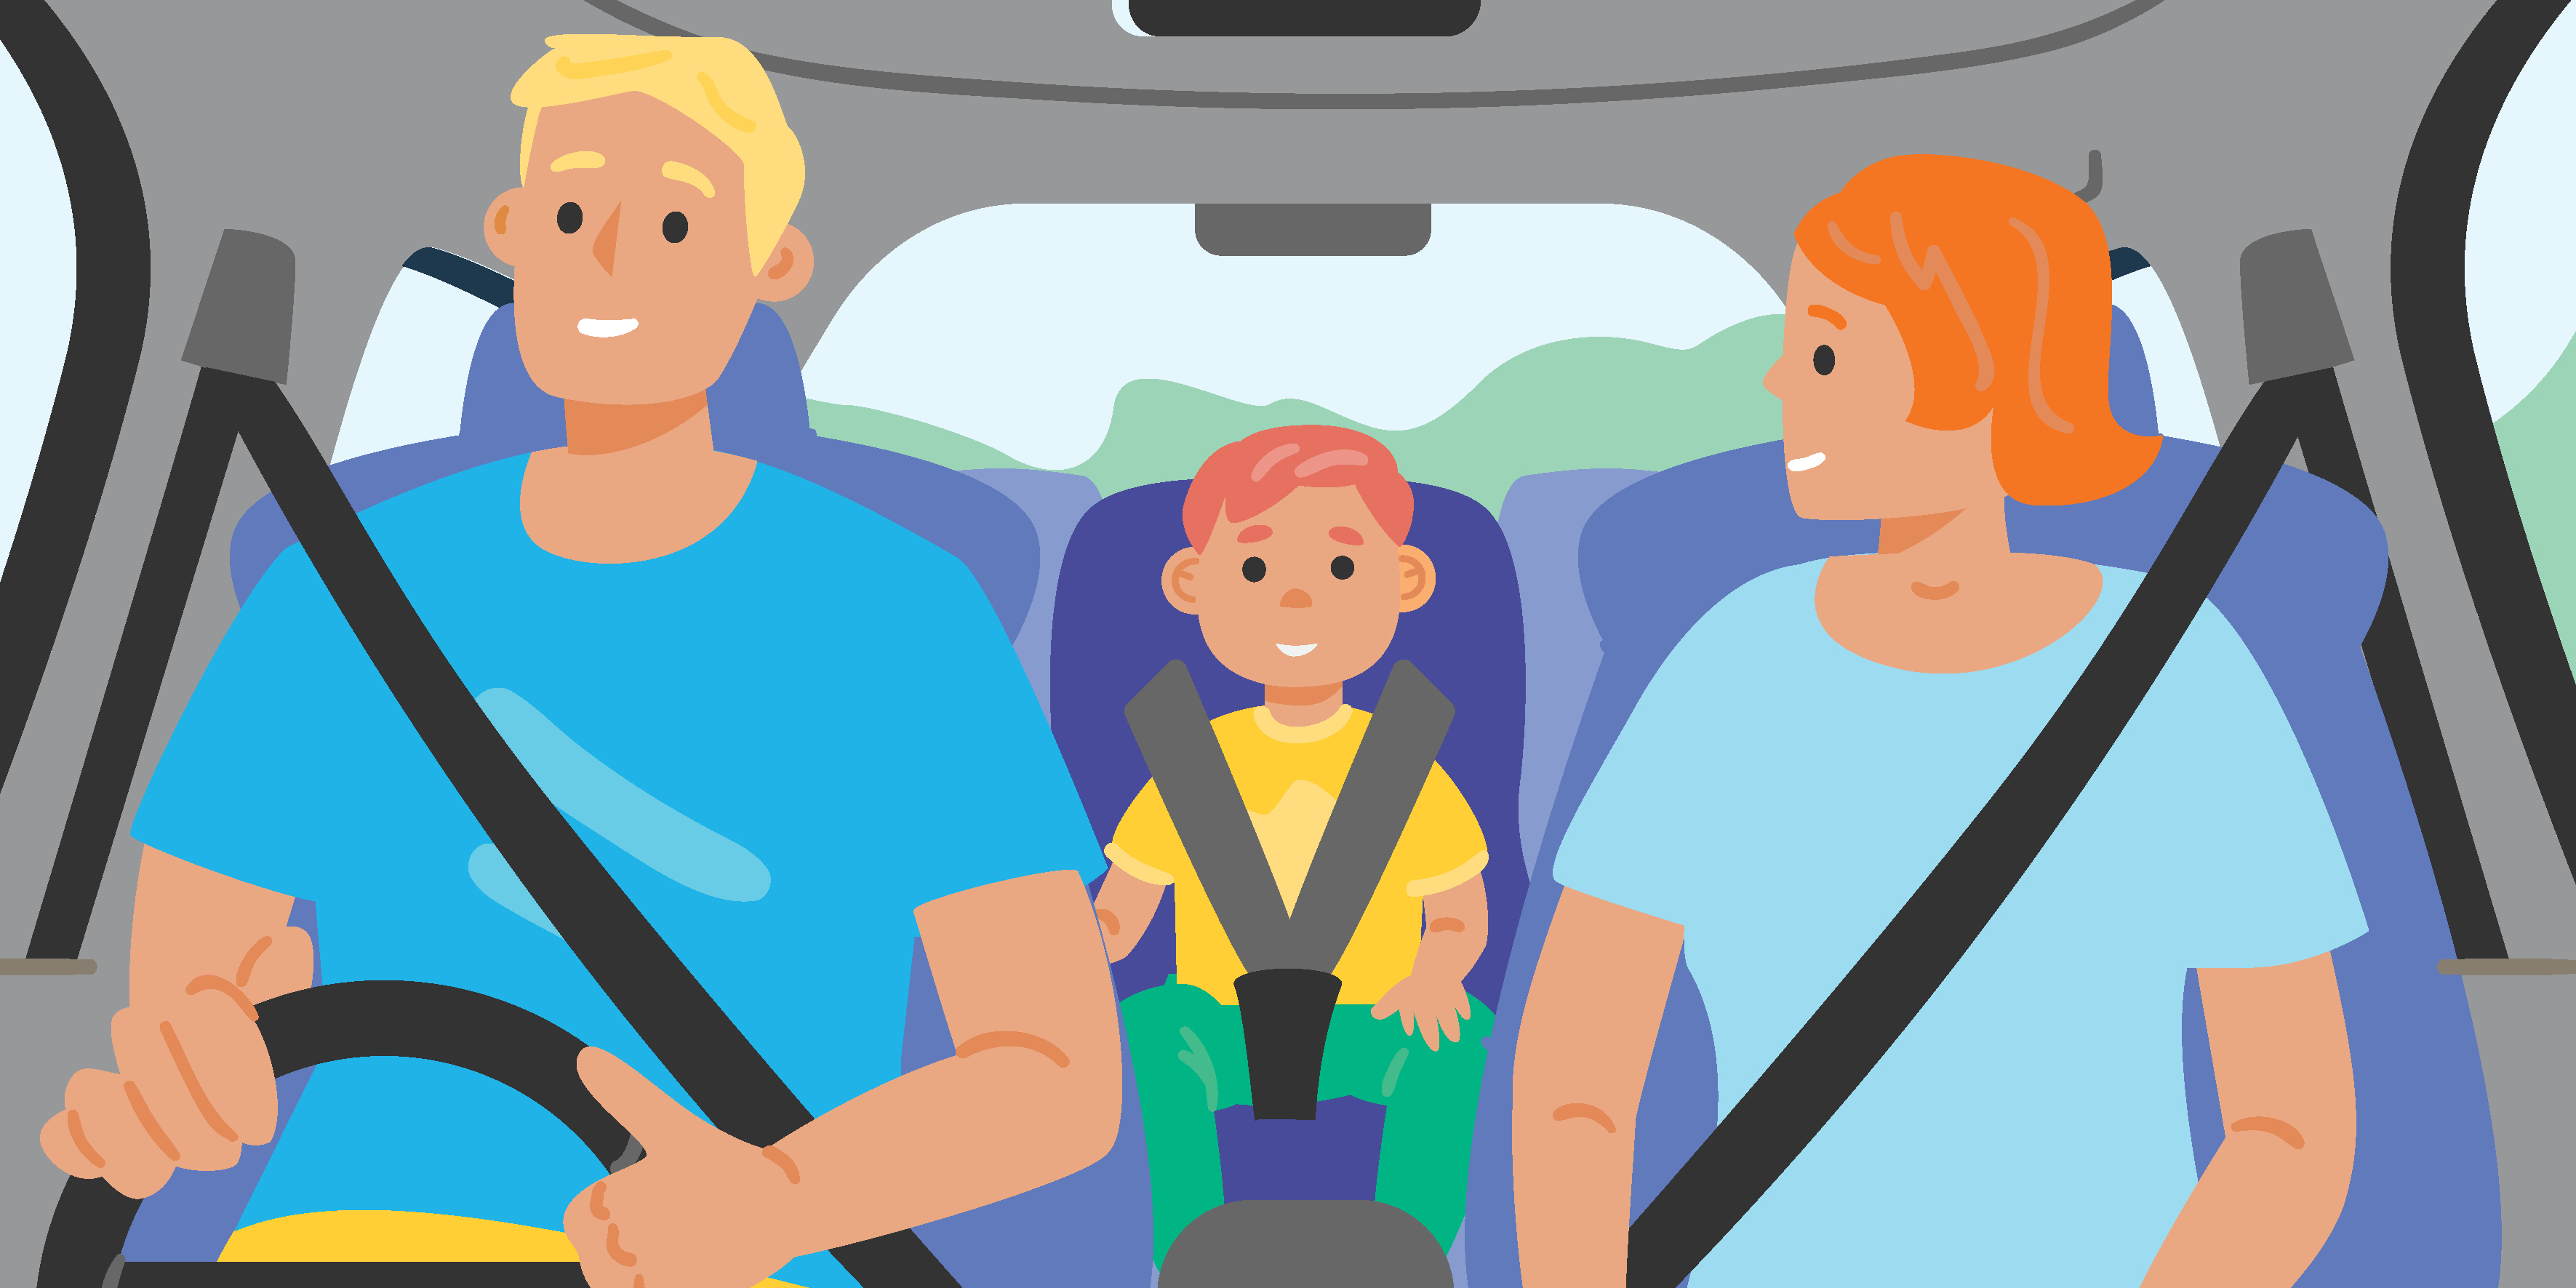 a family driving together in a car, with seatbelts on. Two adults in the front, with a child in a safety seat in the backseat. 